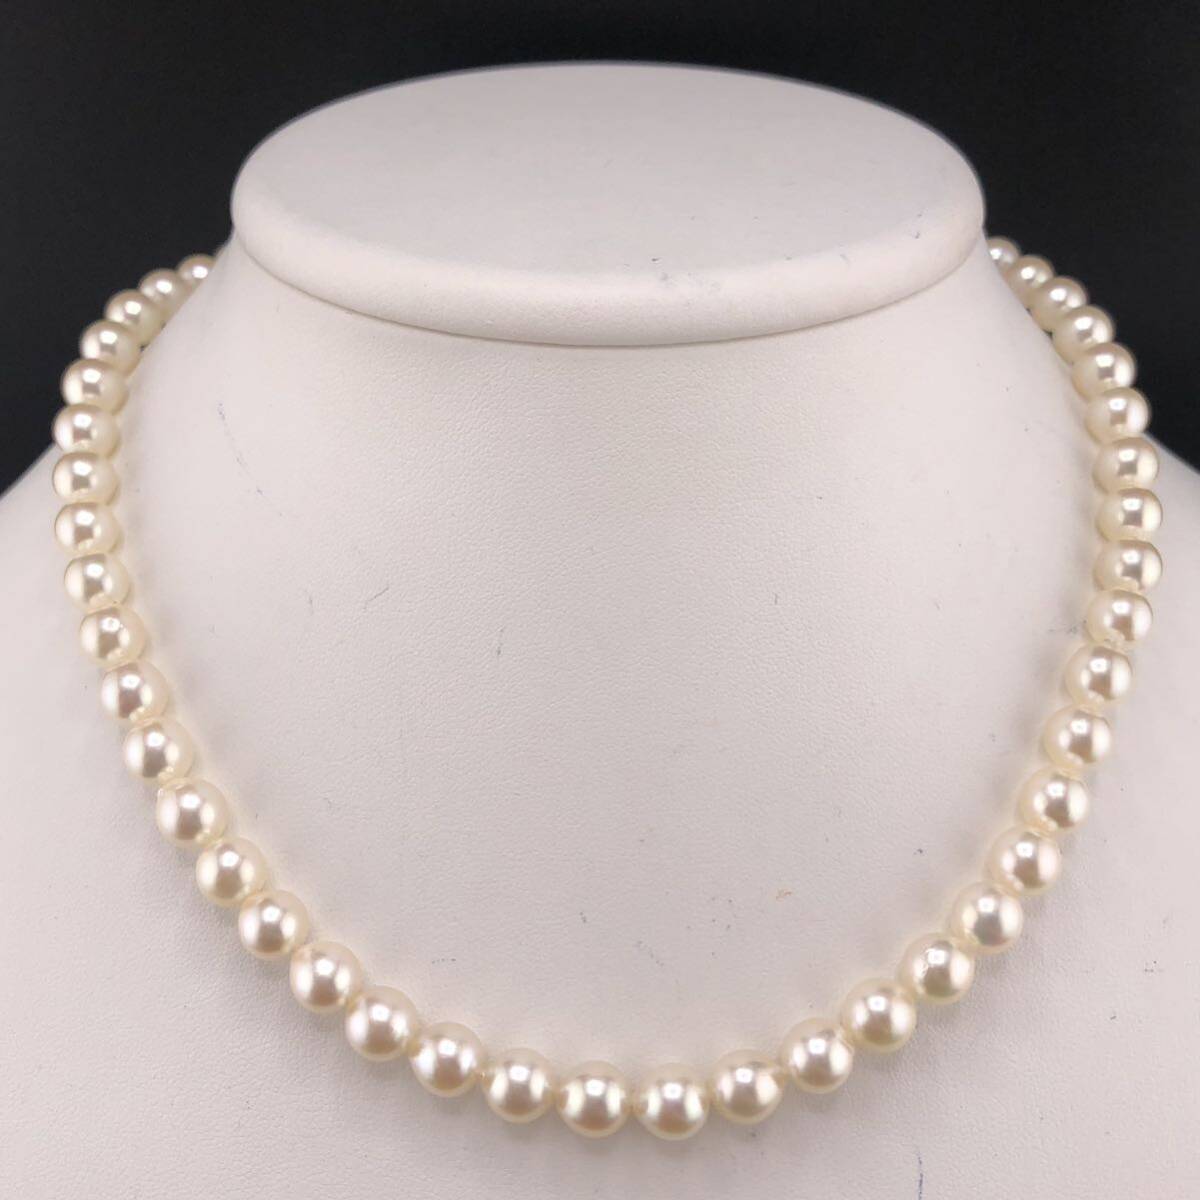 E04-8023 アコヤパールネックレス 7.0mm 40cm 32.5g ( アコヤ真珠 Pearl necklace SILVER )の画像1